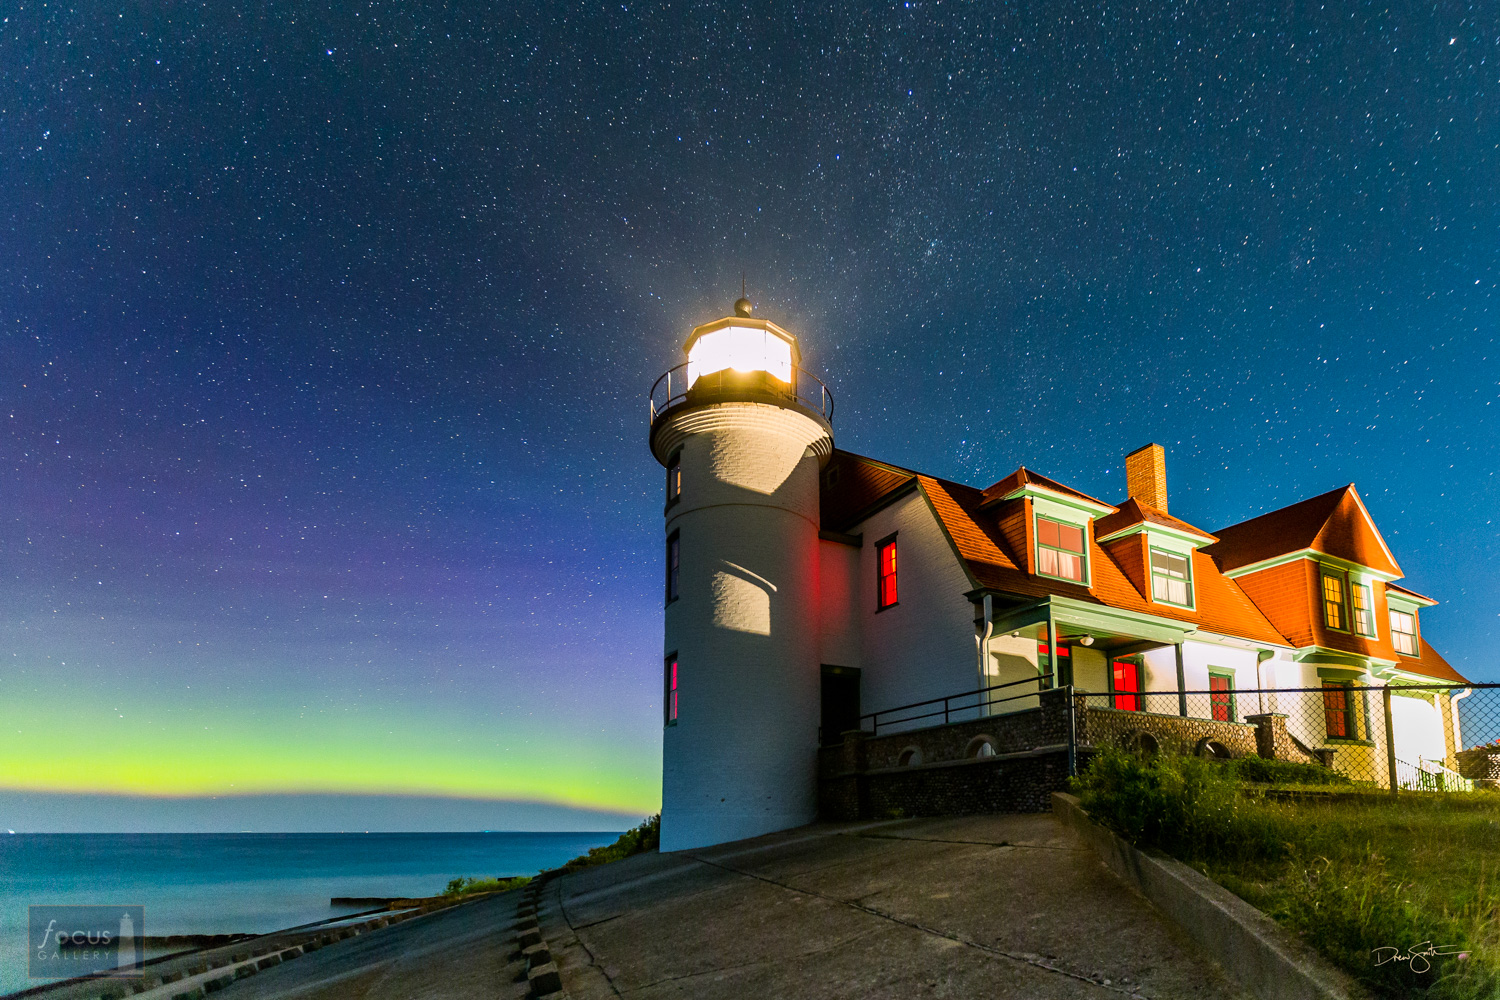 Aurora borealis over Lake Michigan and the Point Betsie Lighthouse.